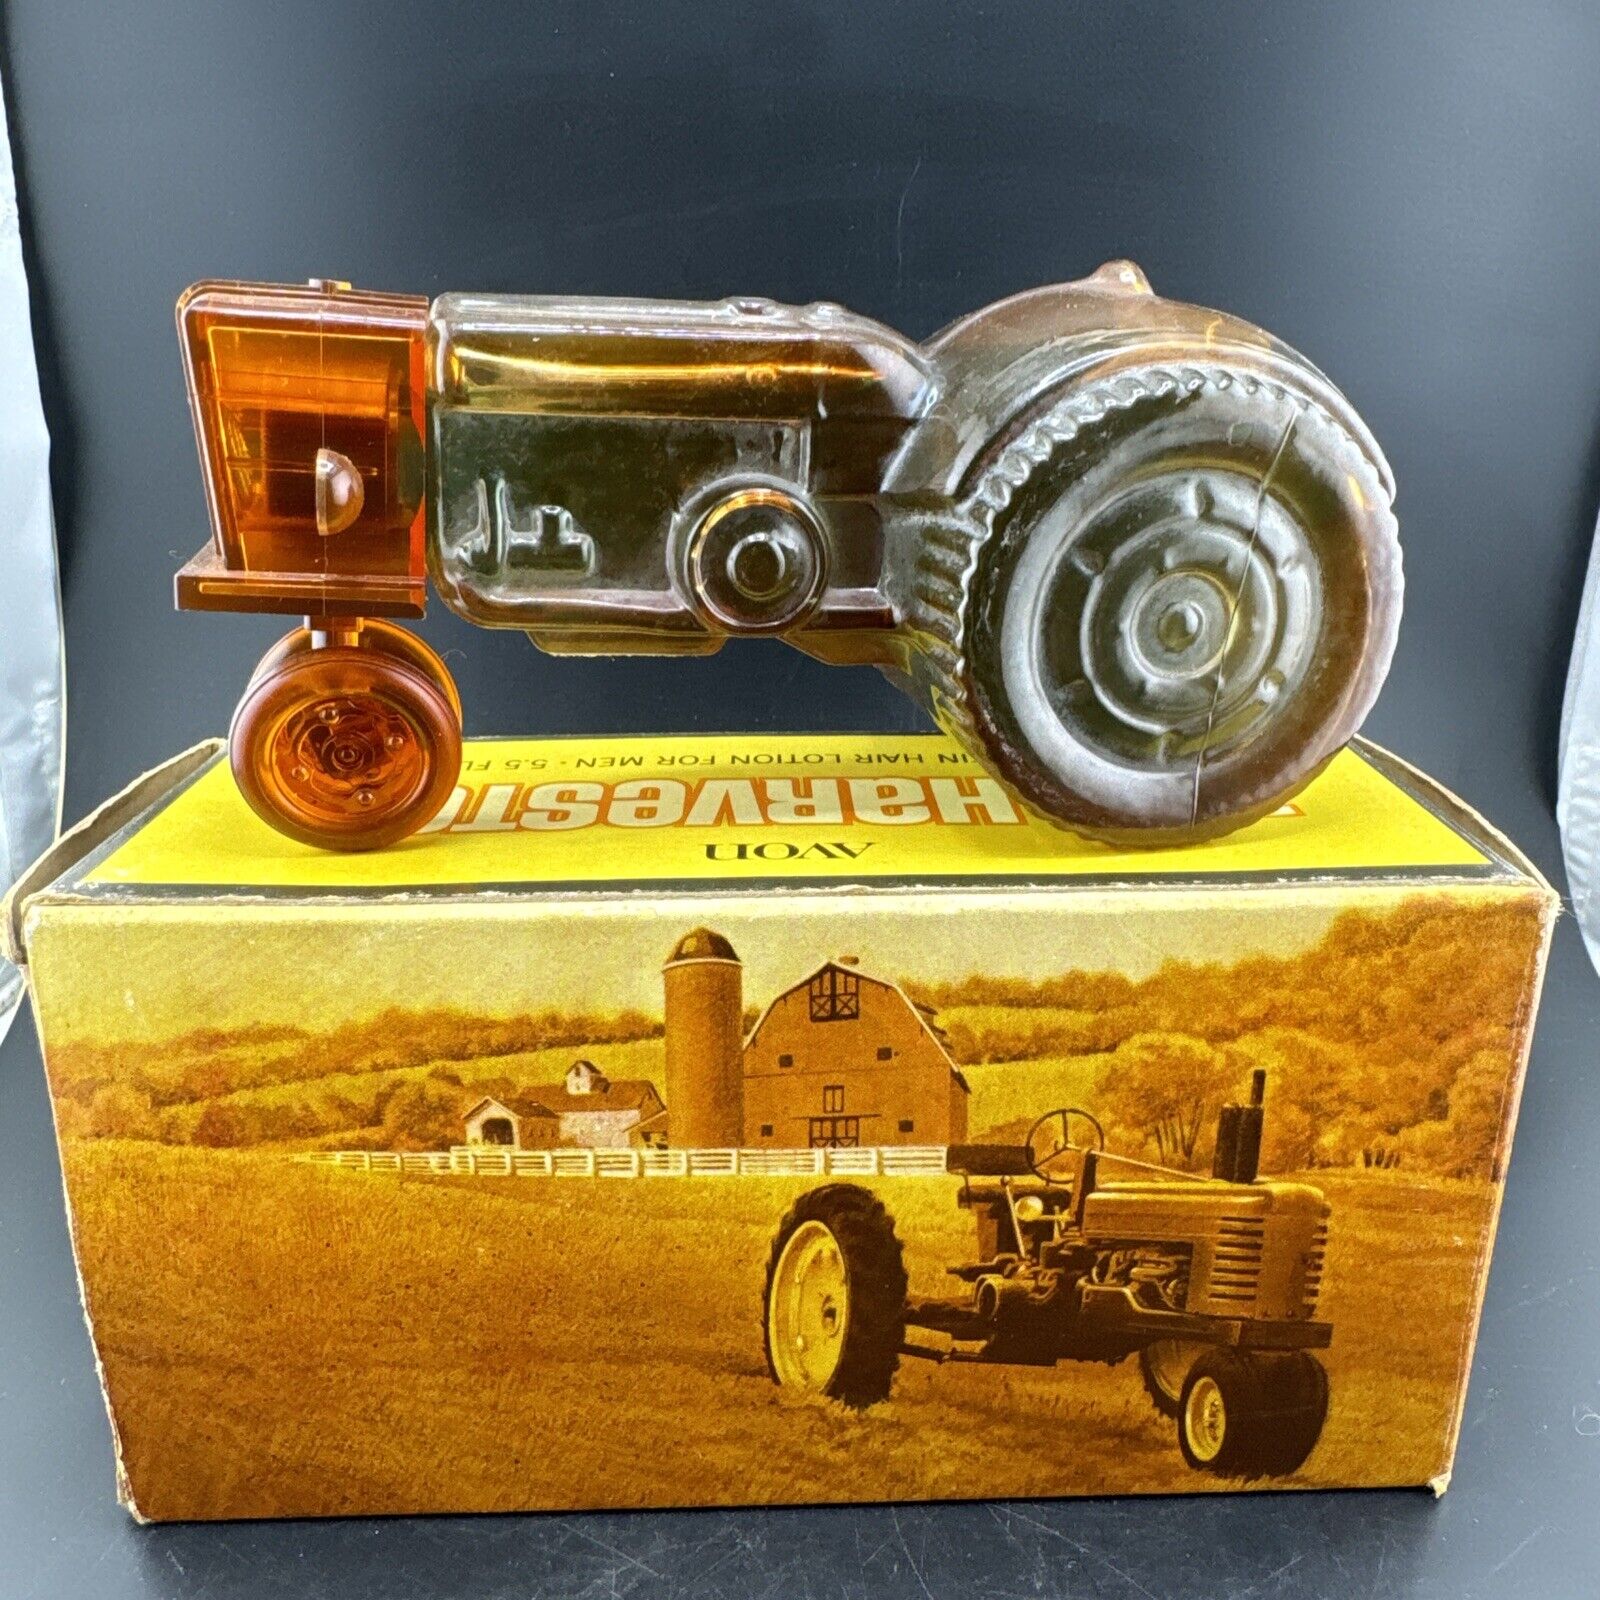 AVON THE HARVESTER TRACTOR AFTER SHAVE 5.5 OZ DECANTER Full With Box